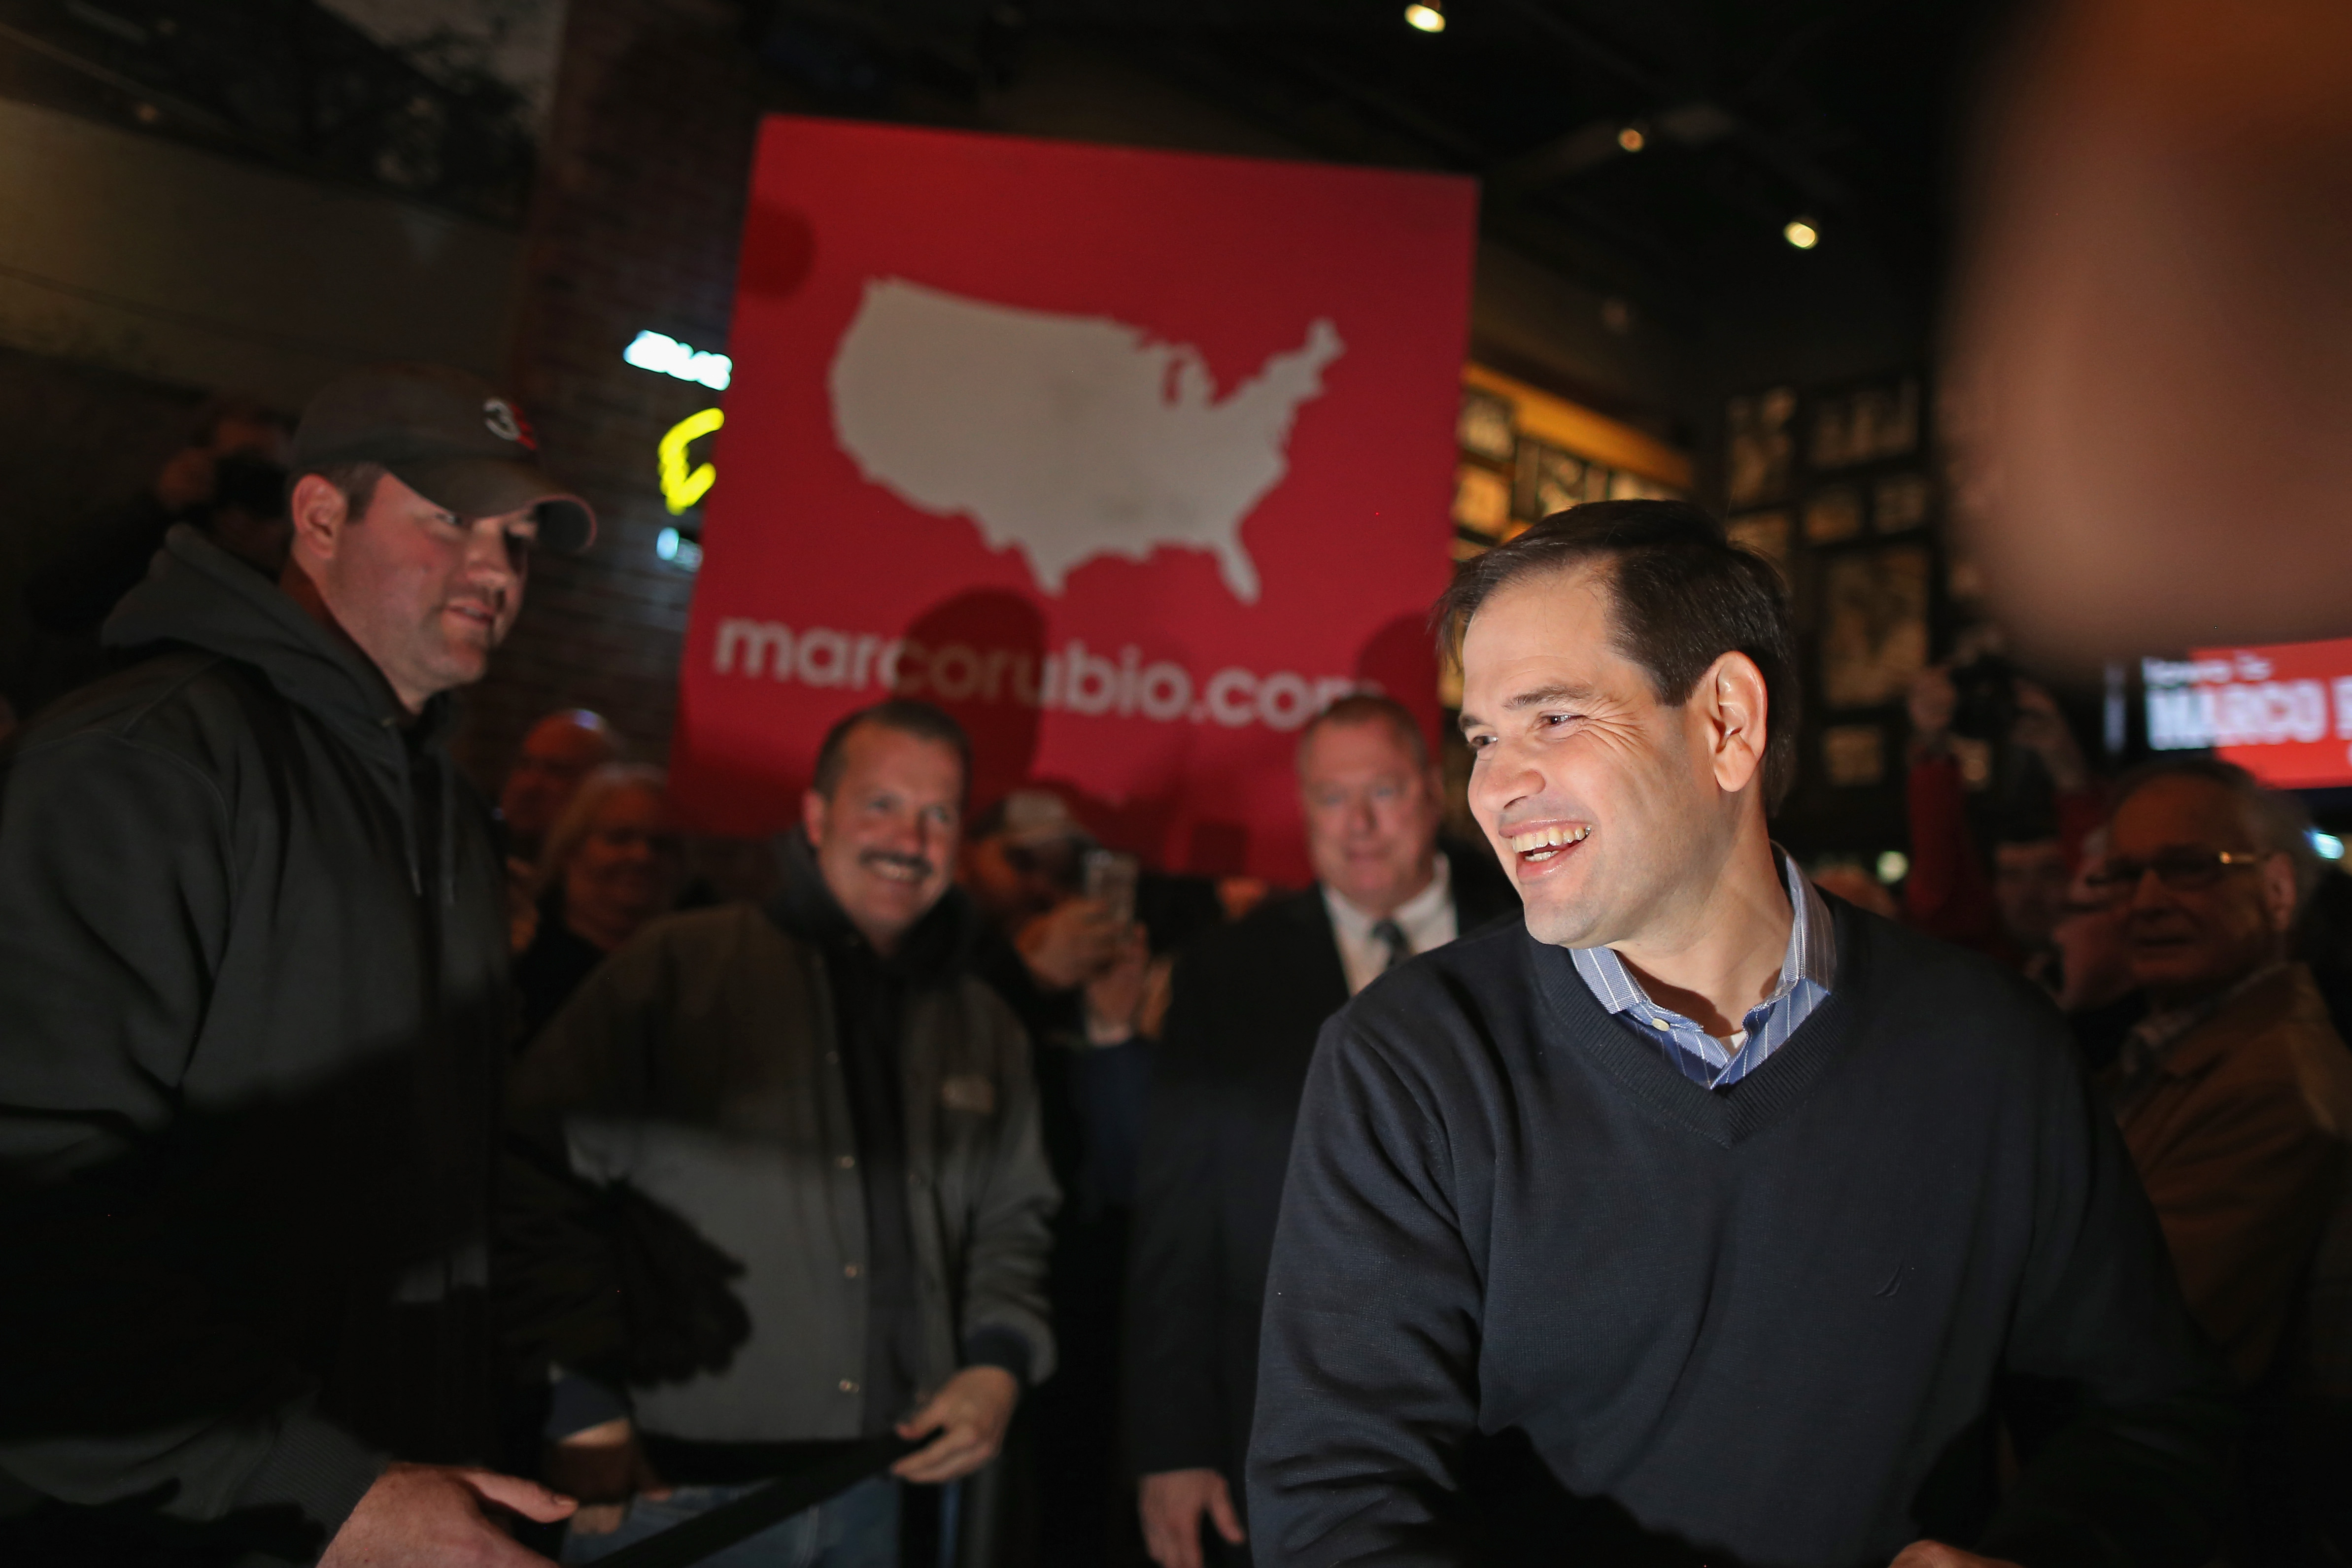 Republican presidential candidate Sen. Marco Rubio  speaks to guests and supporters during a campaign rally on Jan. 27, 2016 in West Des Moines, Iowa. (Christopher Furlong—Getty Images)